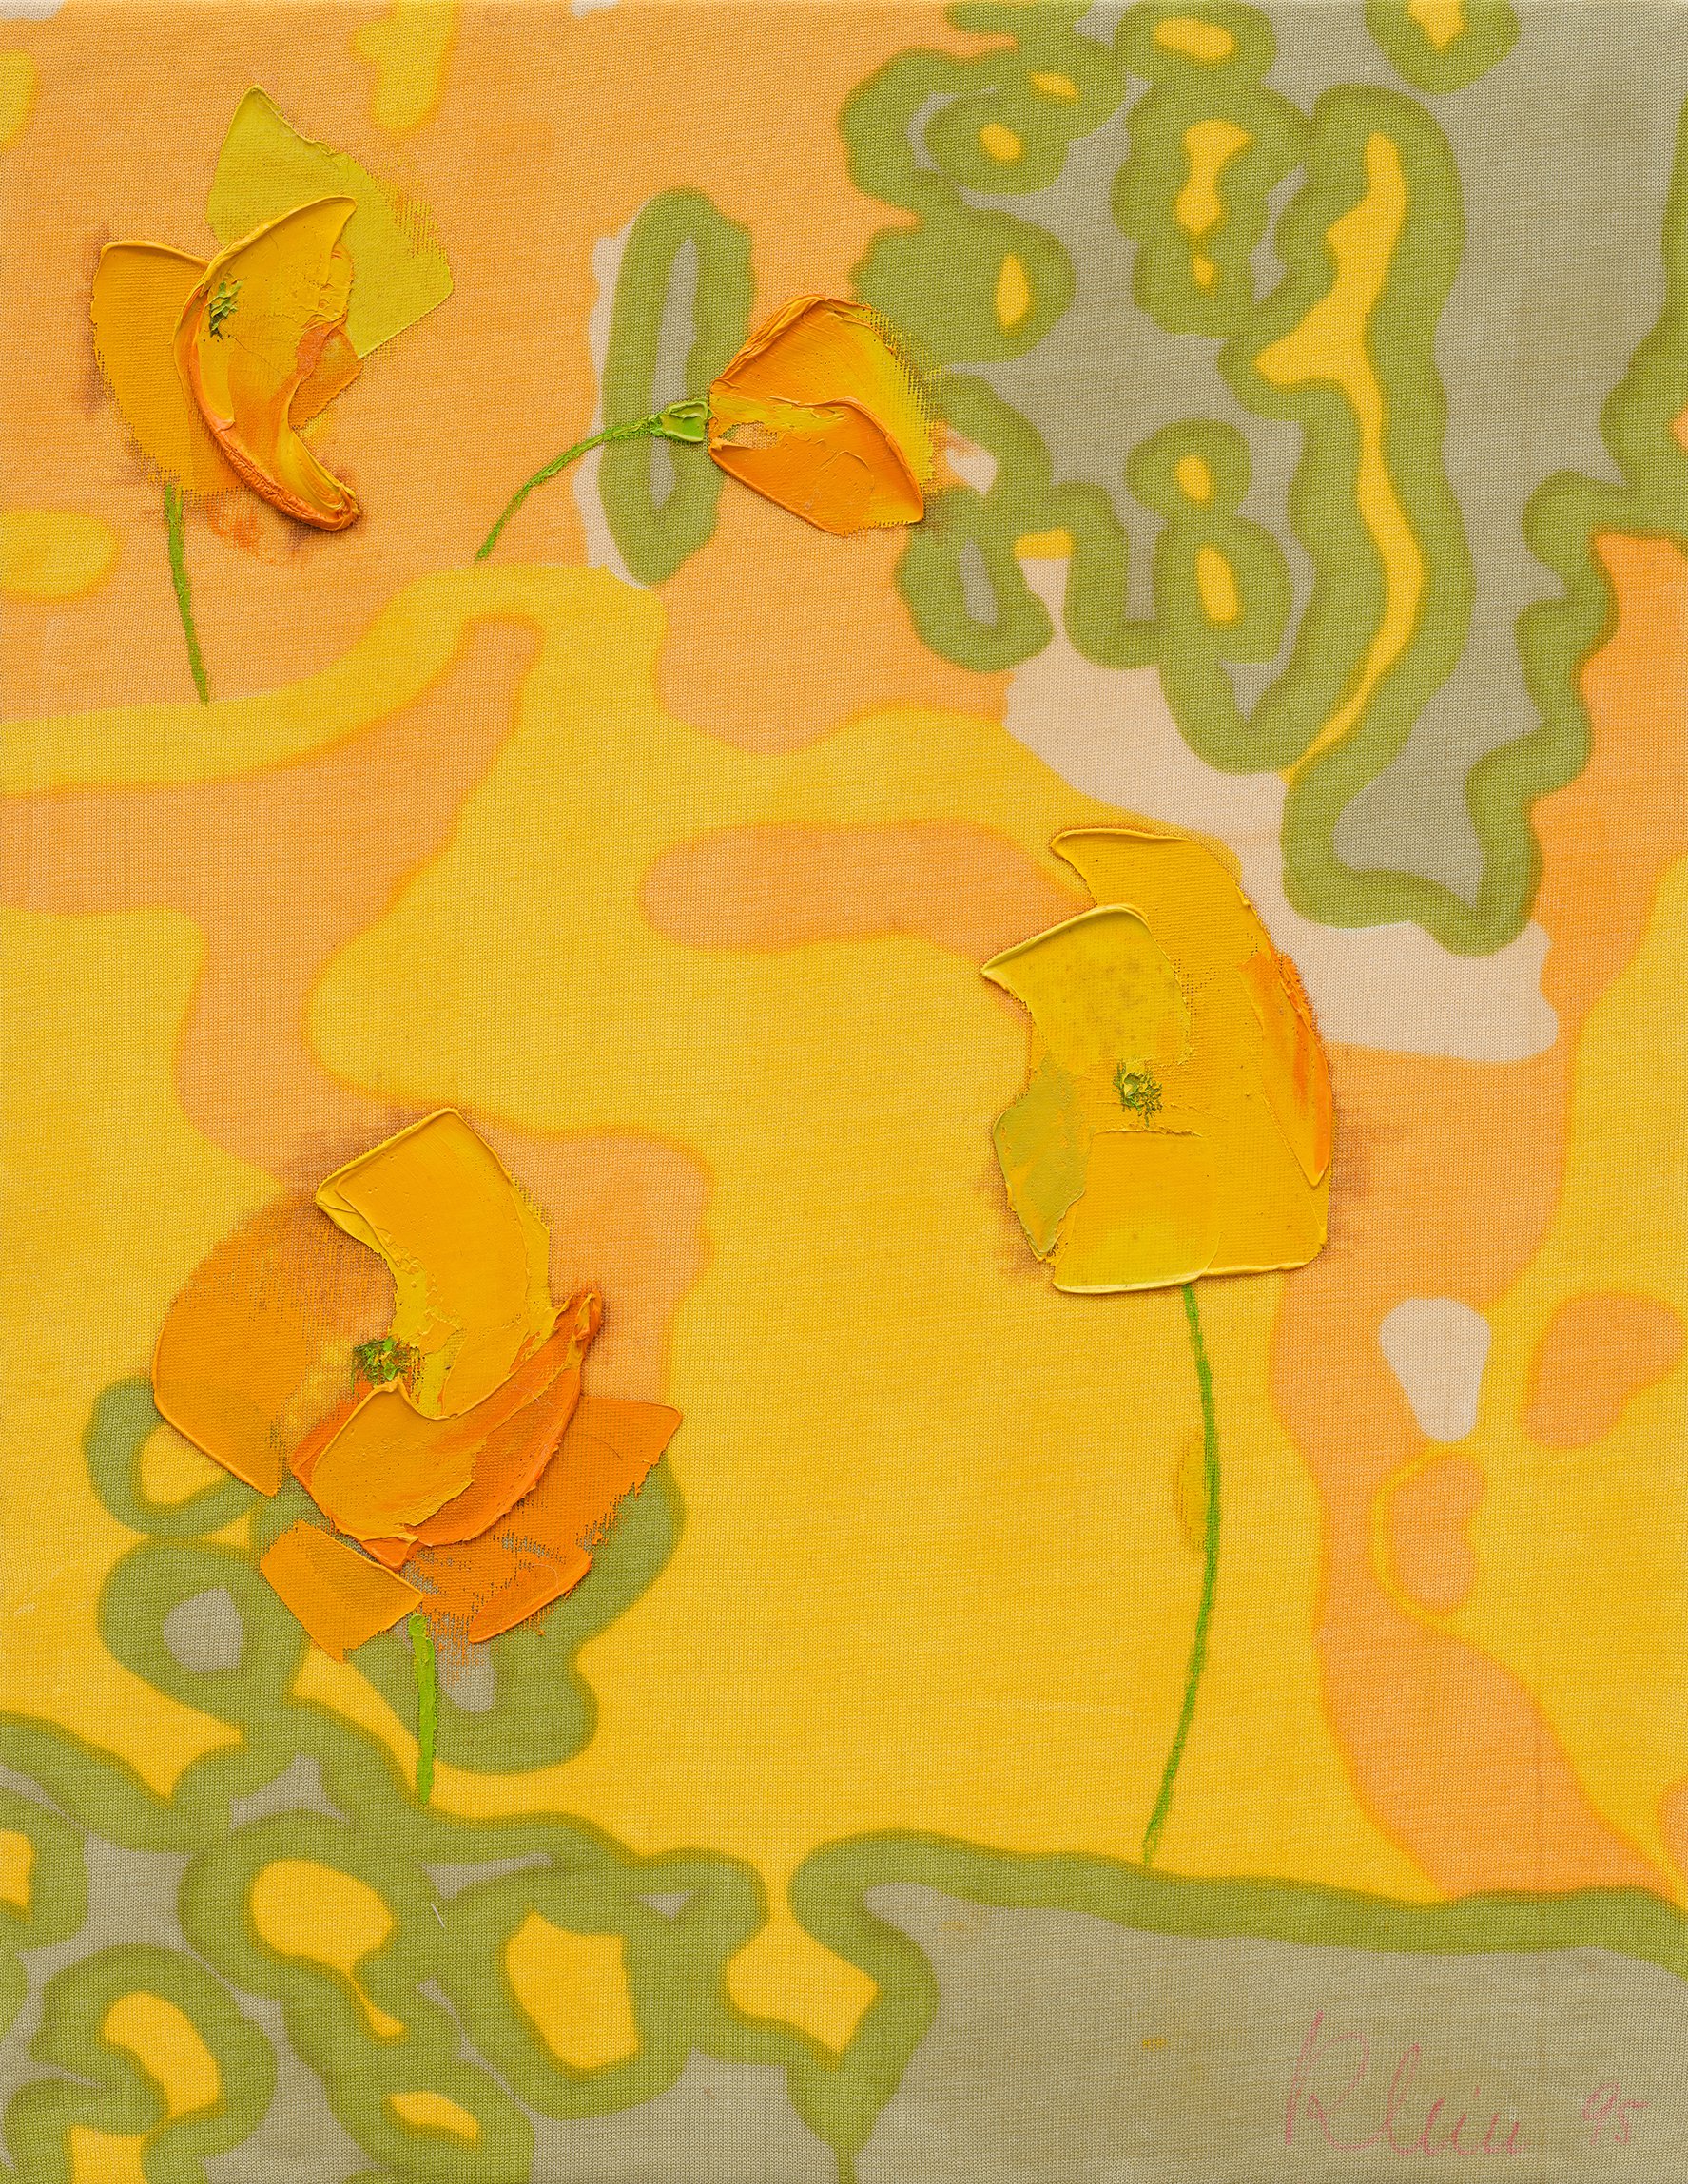 Bernat Klein, Yellow Poppies, oil on screen printed knitted jersey polyester (Diolen), 47 x 36 cm (18 1/2 x 14 1/8 in), 1995